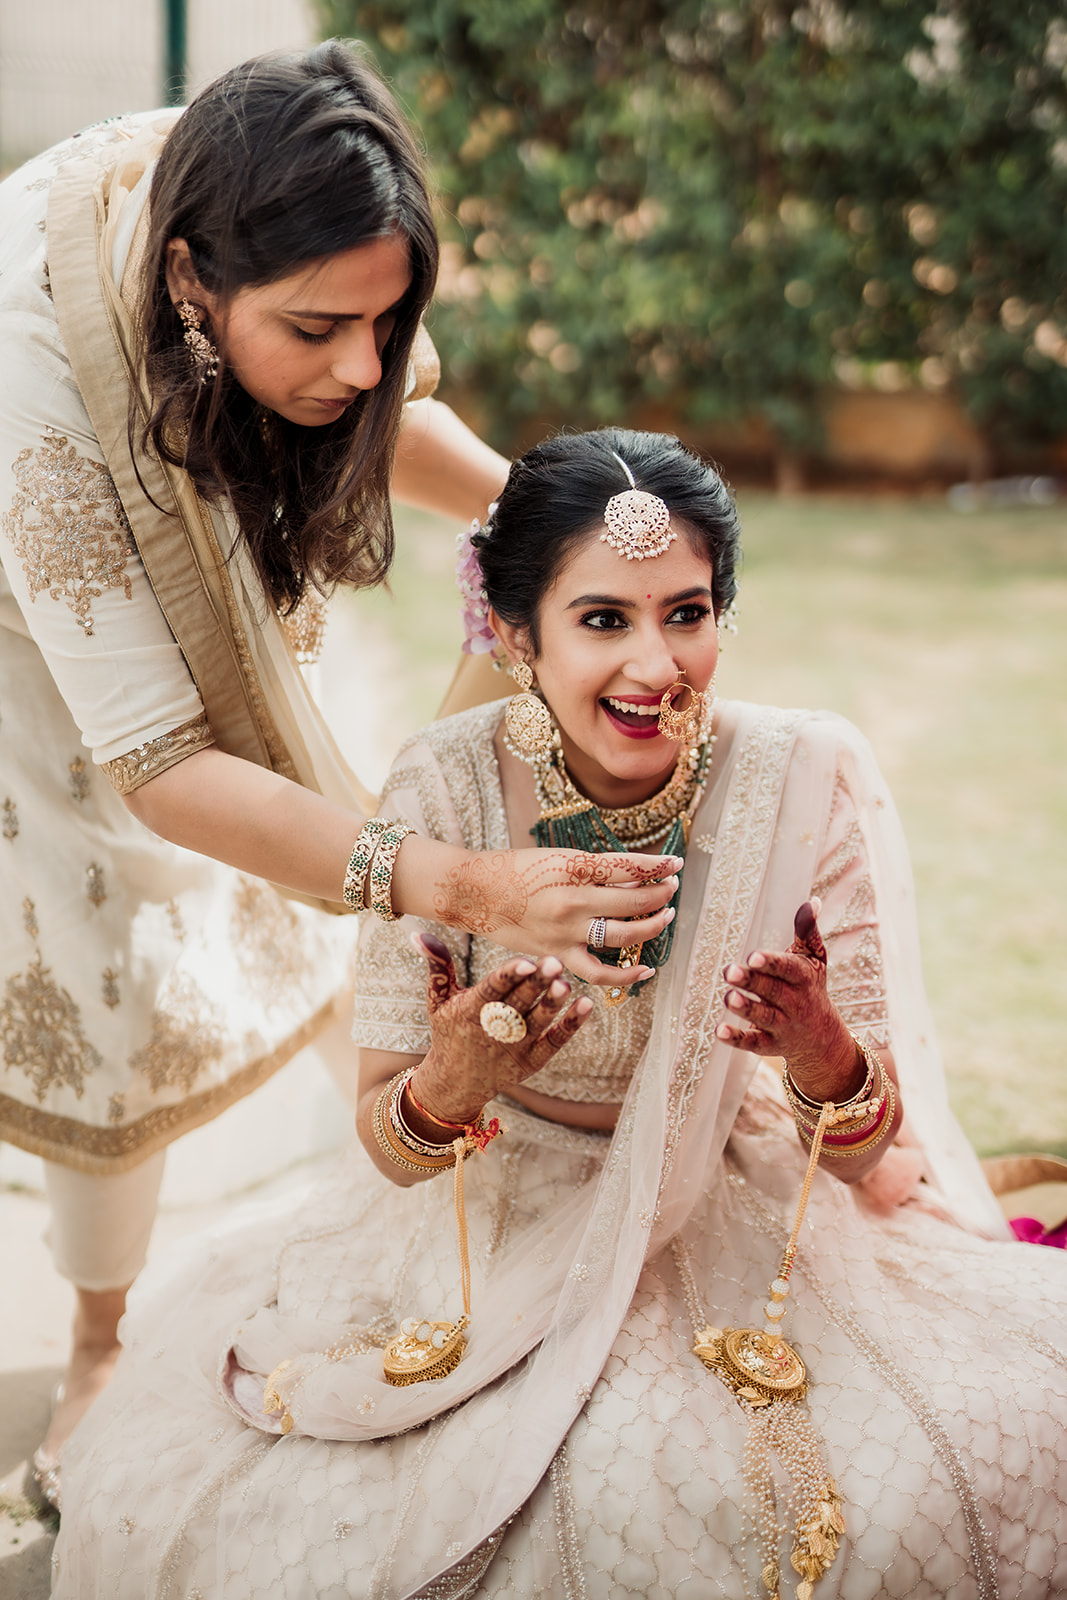 Bridal family bond: A beautiful scene as family members collaborate to perfect the bride's jewellery